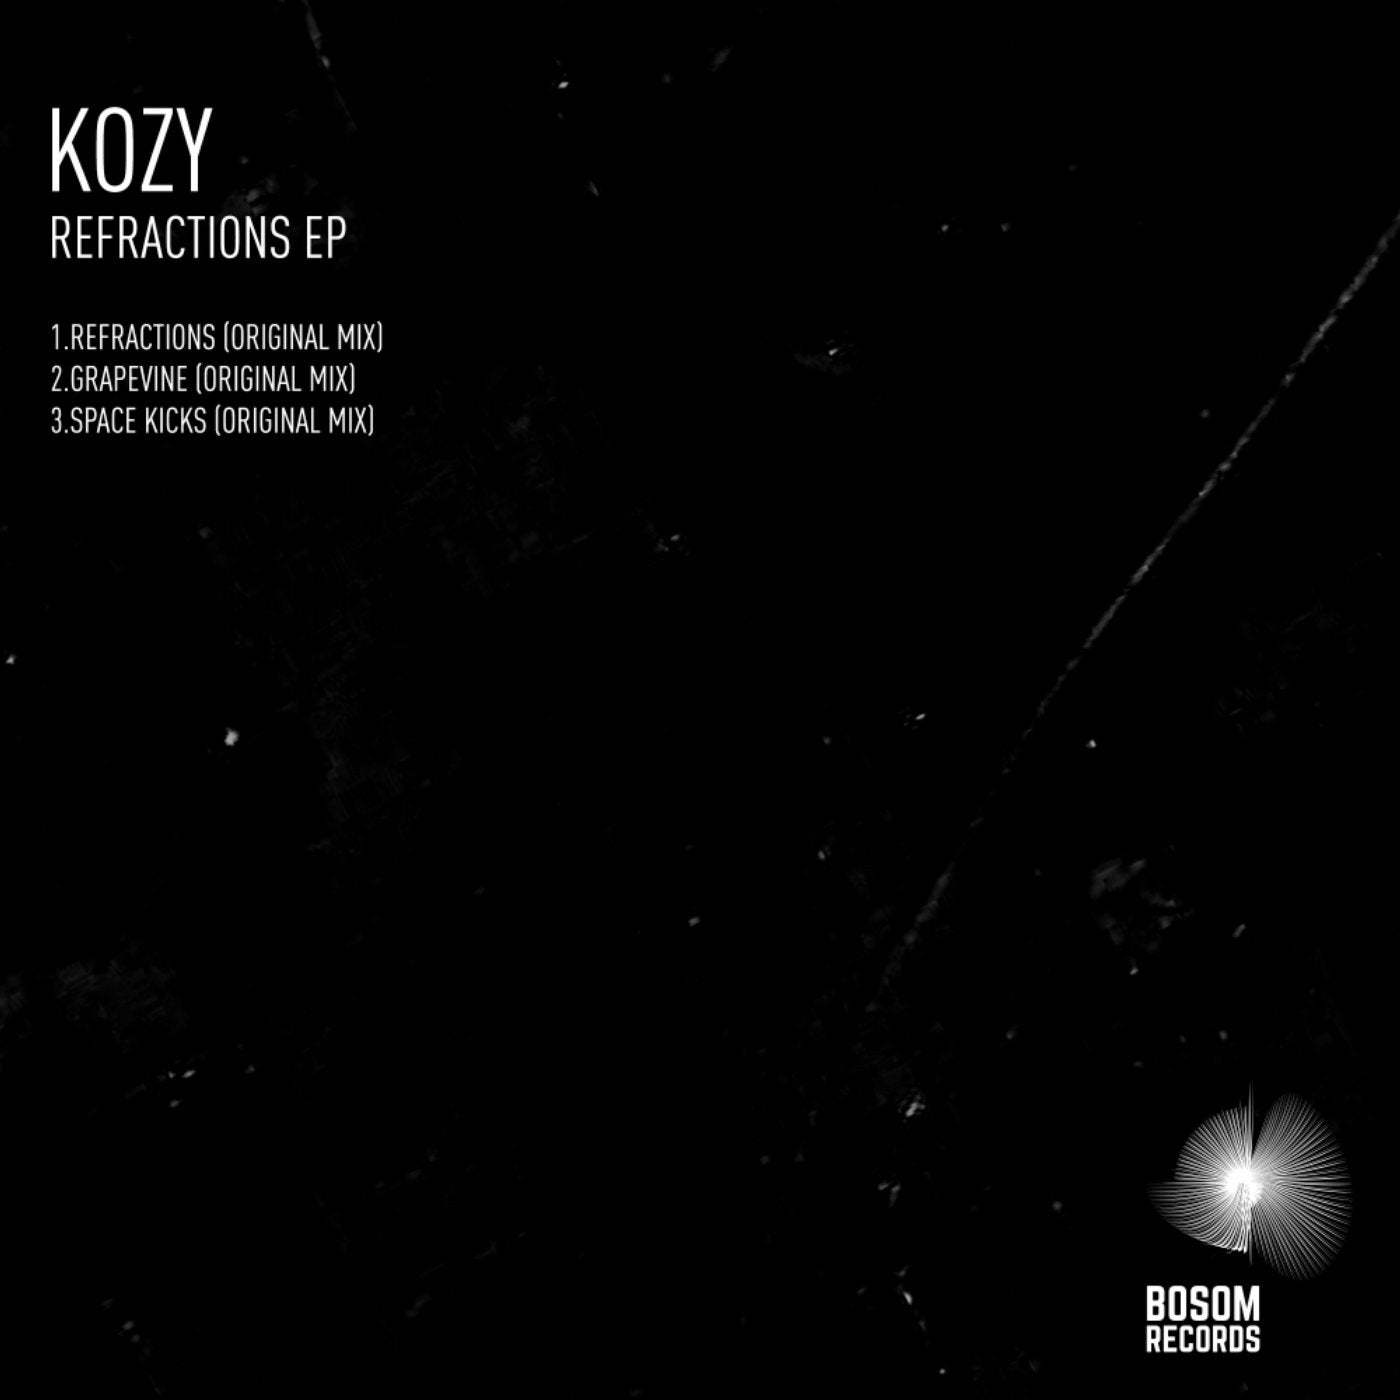 Refractions EP